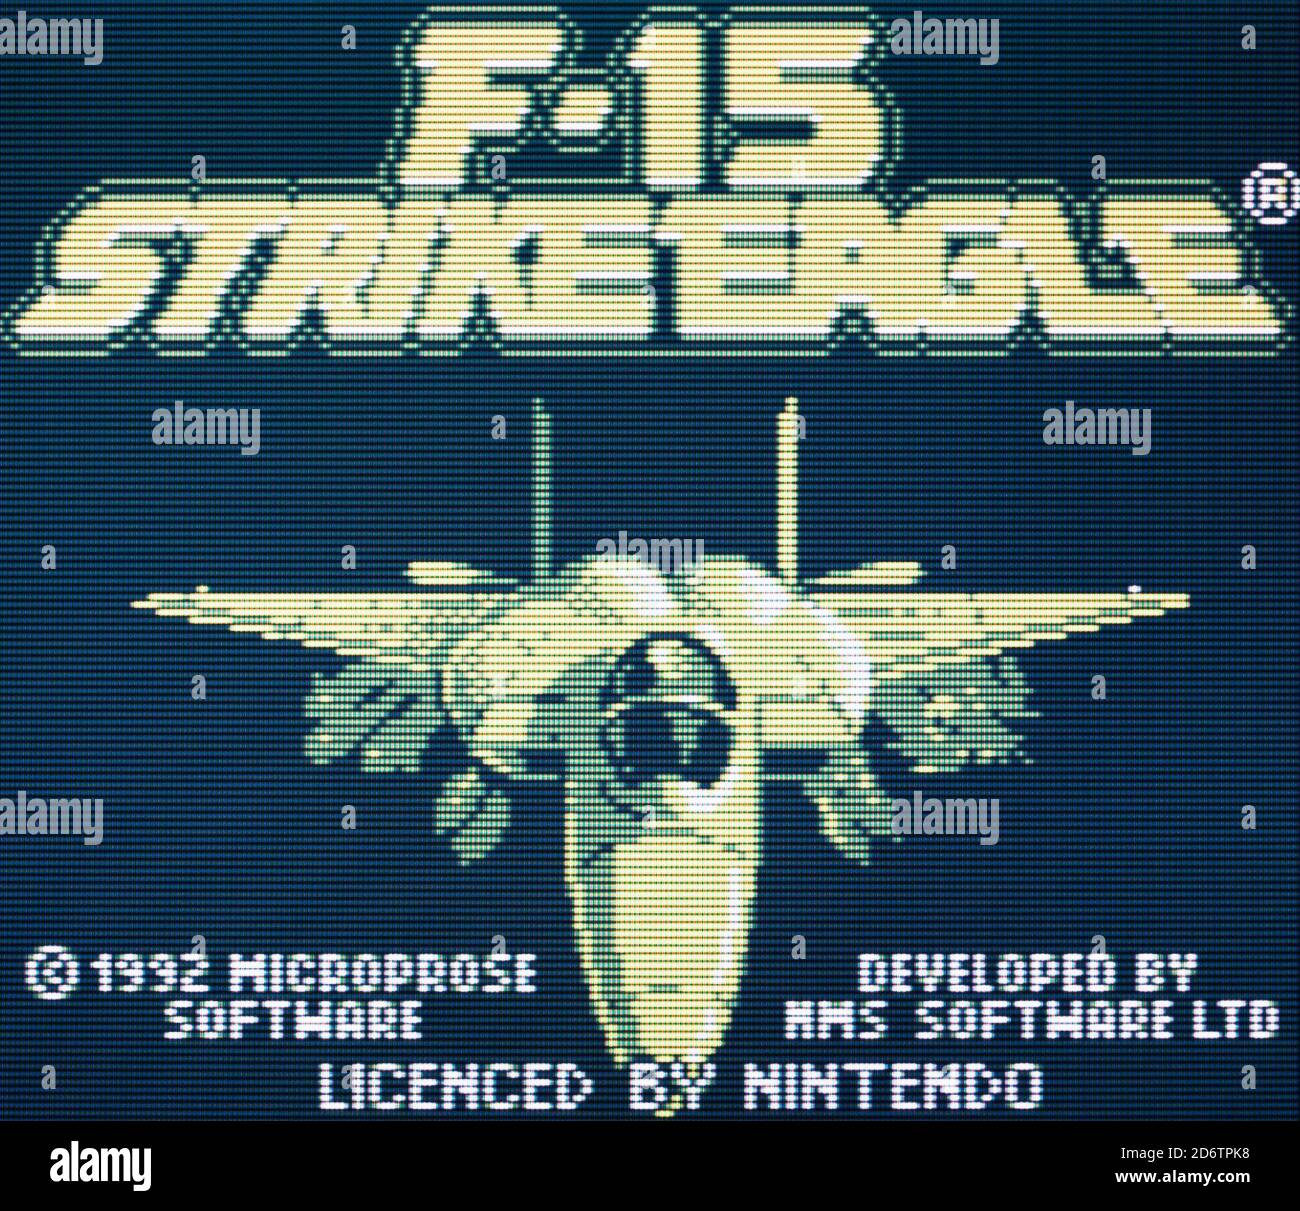 F-15 Strike Eagle - Nintendo Gameboy Videogame - Editorial use only Stock Photo